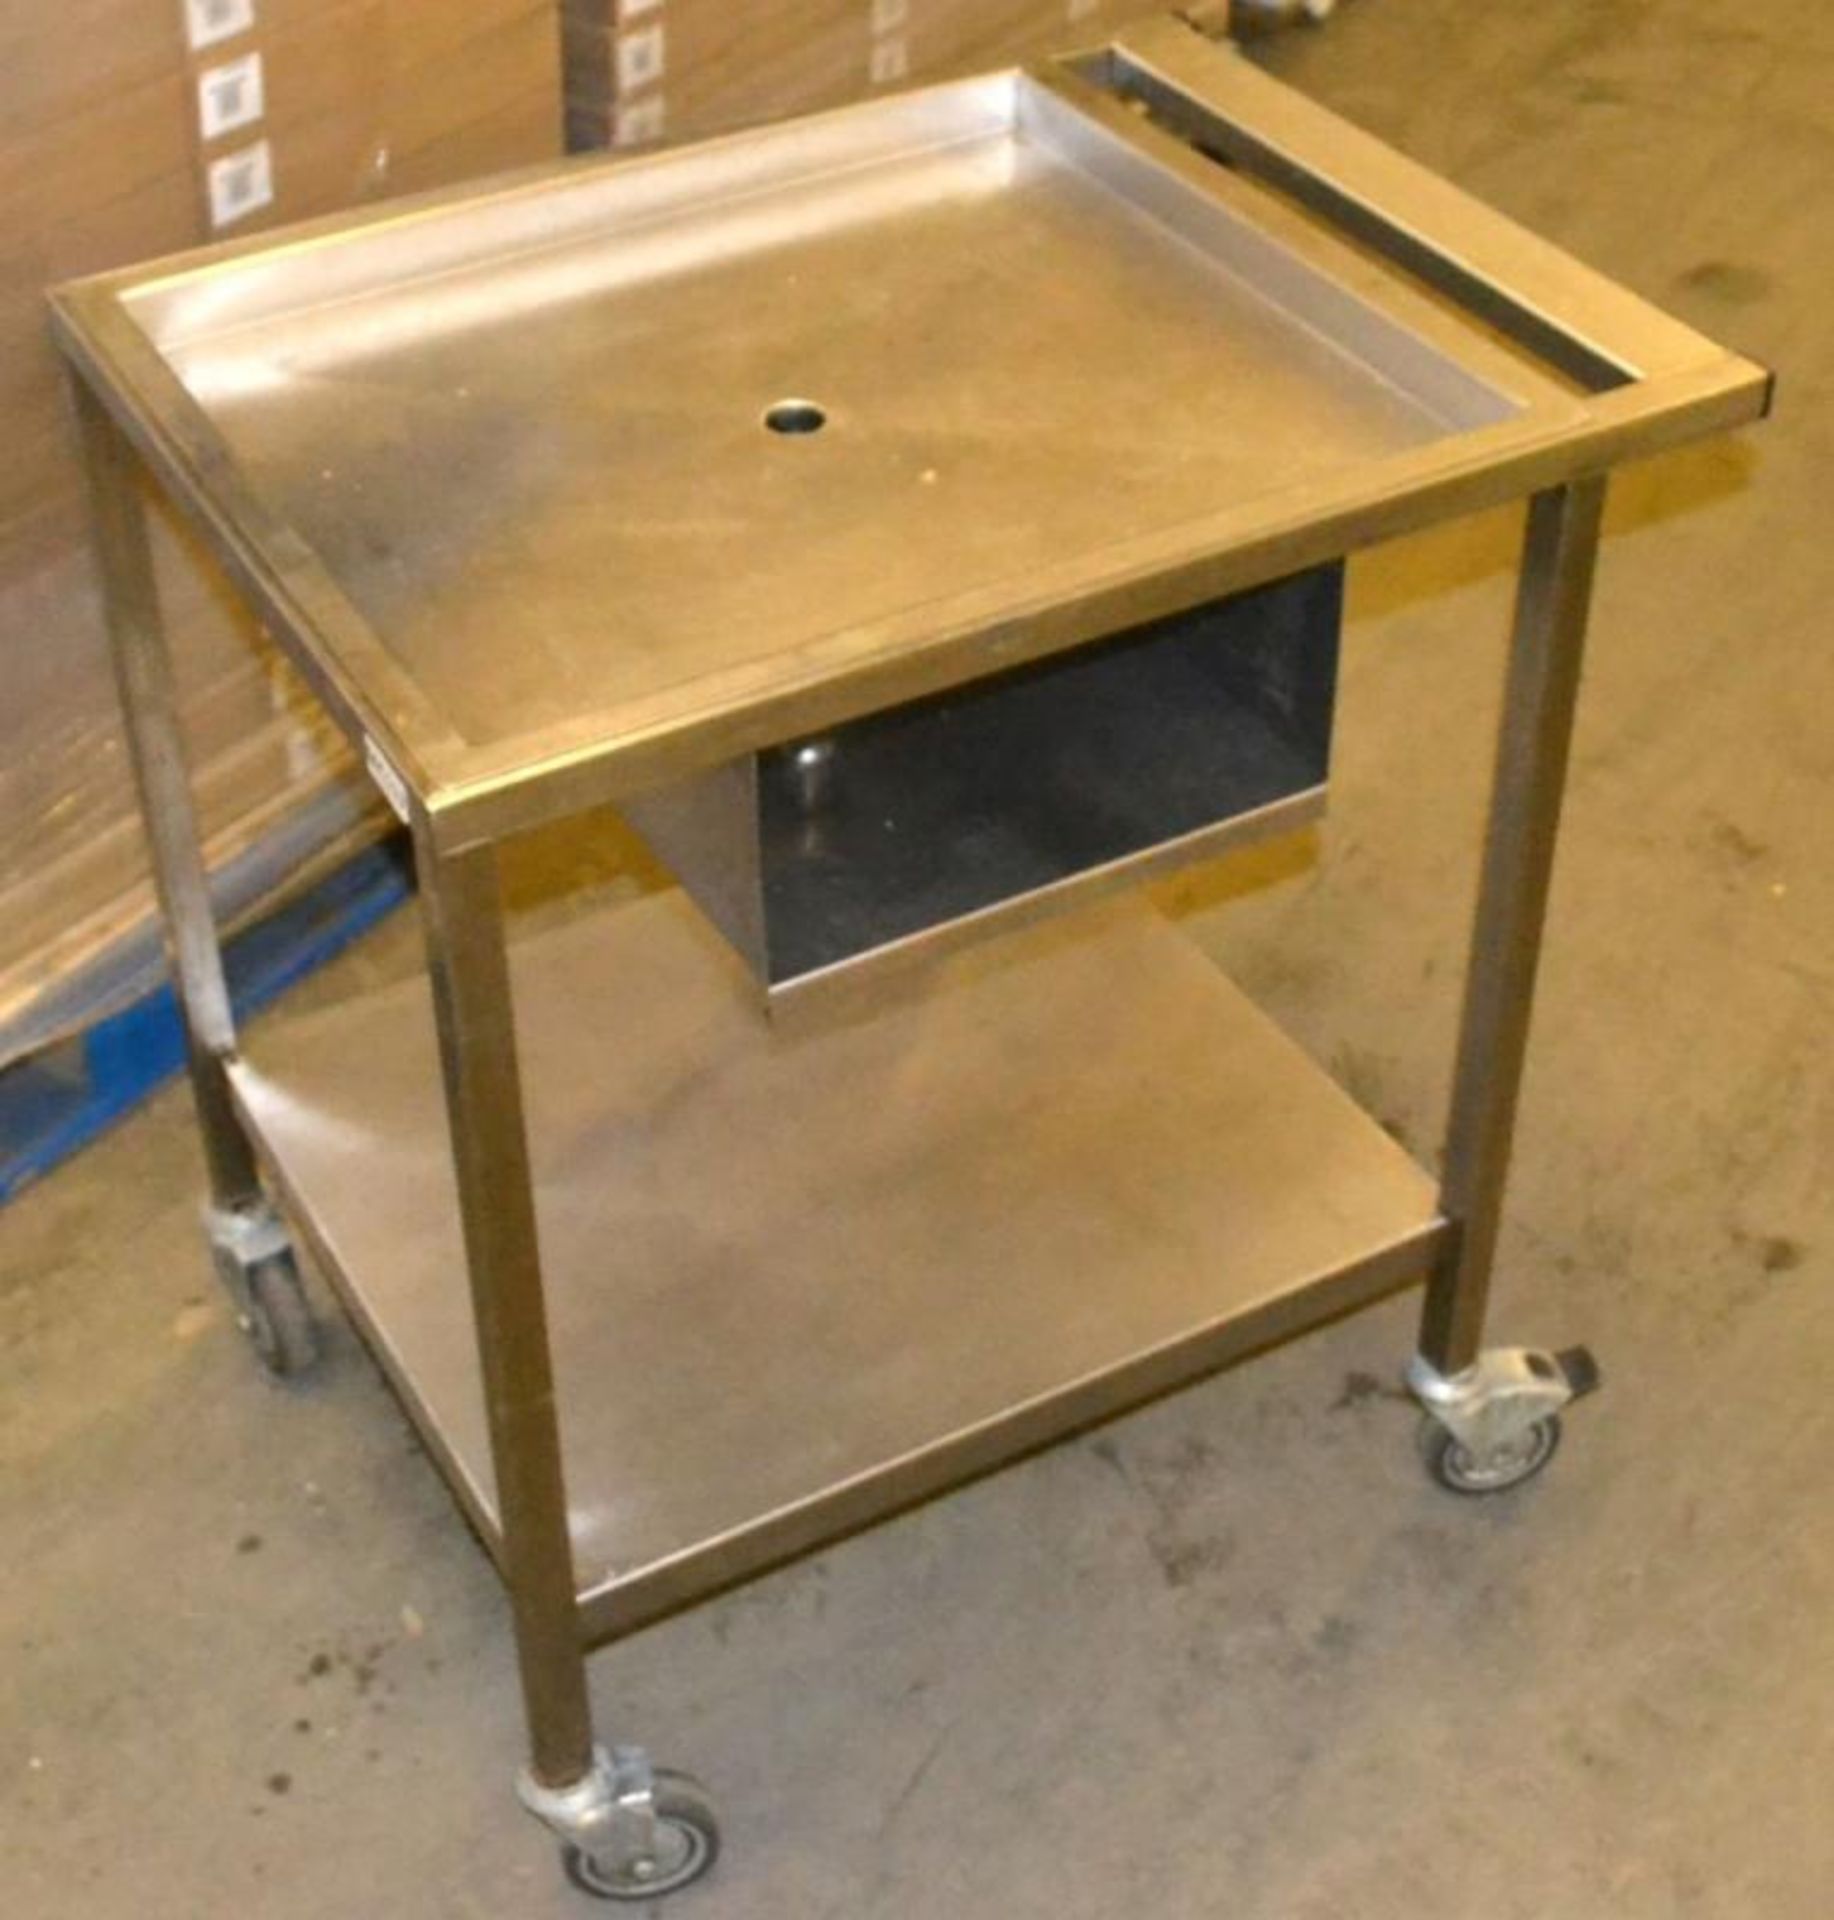 1 x Wheeled Stainless Steel Prep Bench with Drain Hole - Dimensions: 81.5 x 60.5 x 88cm - Ref: MC117 - Image 5 of 7